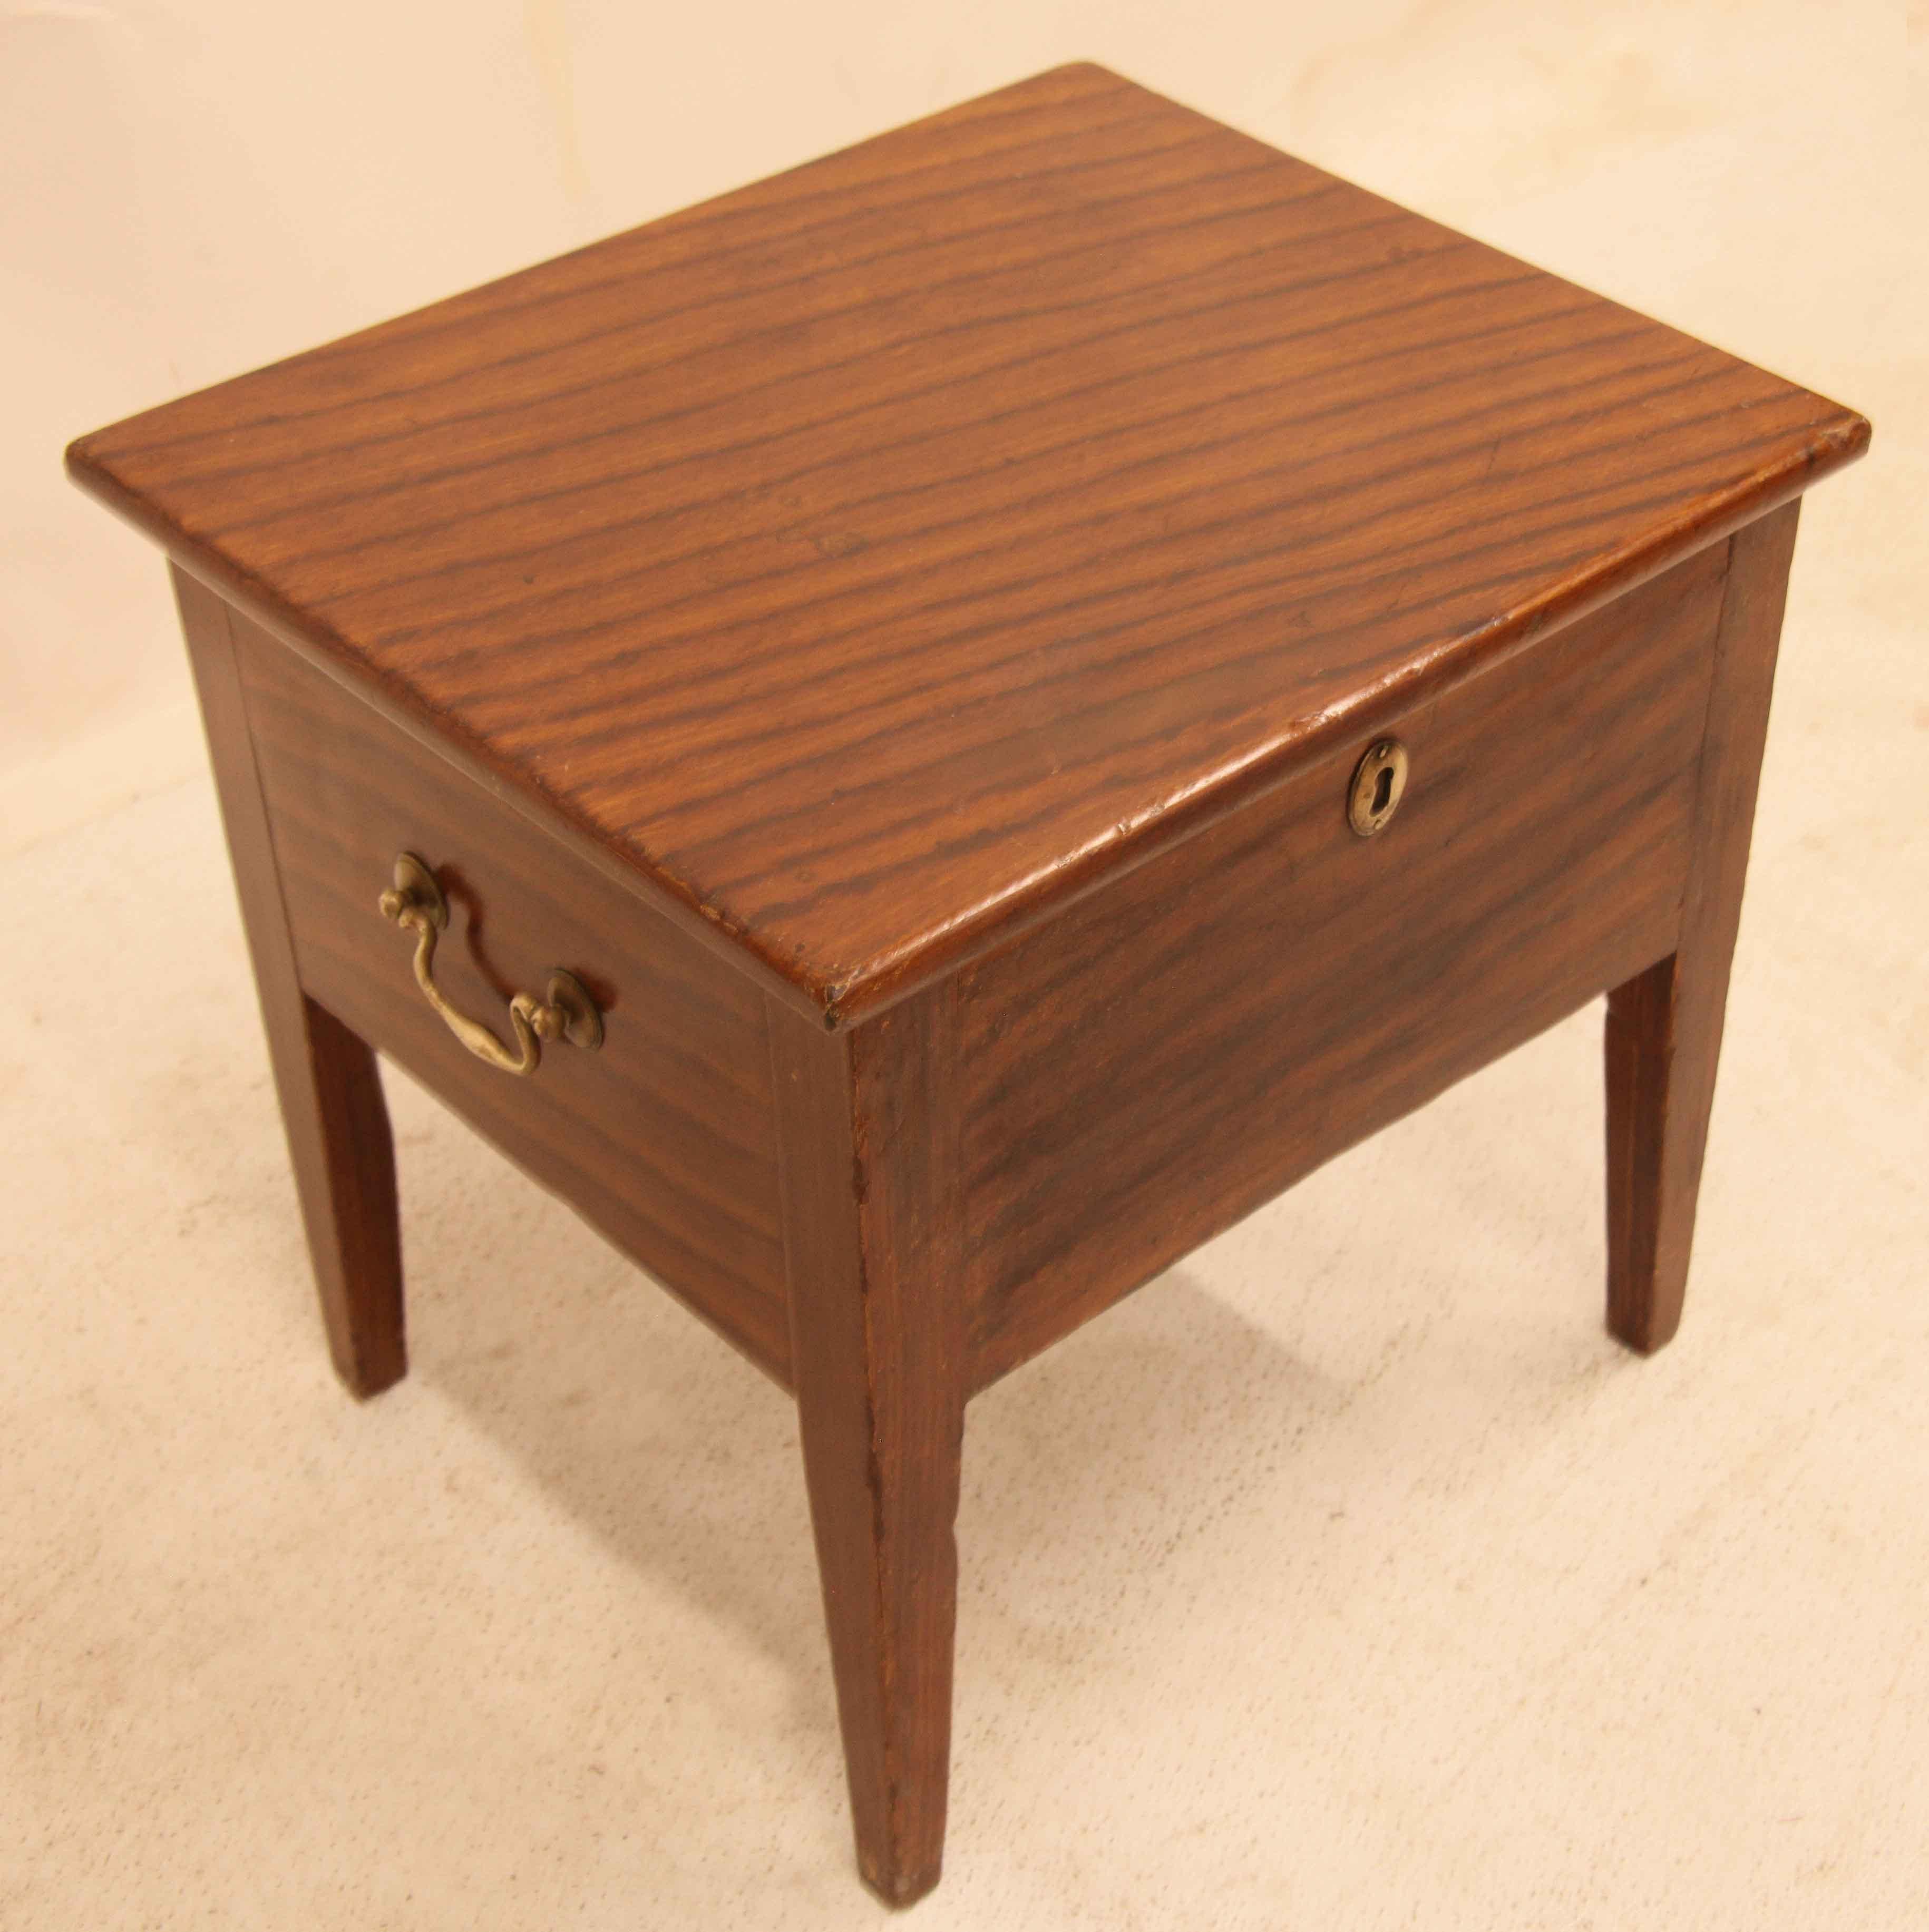 Englsih grain painted end table, this table was originally a commode as revealed when the top is lifted.  The original pottery potty is missing.  The entire exterior is boldly grain painted to simulate mahogany; the sides have brass swan neck